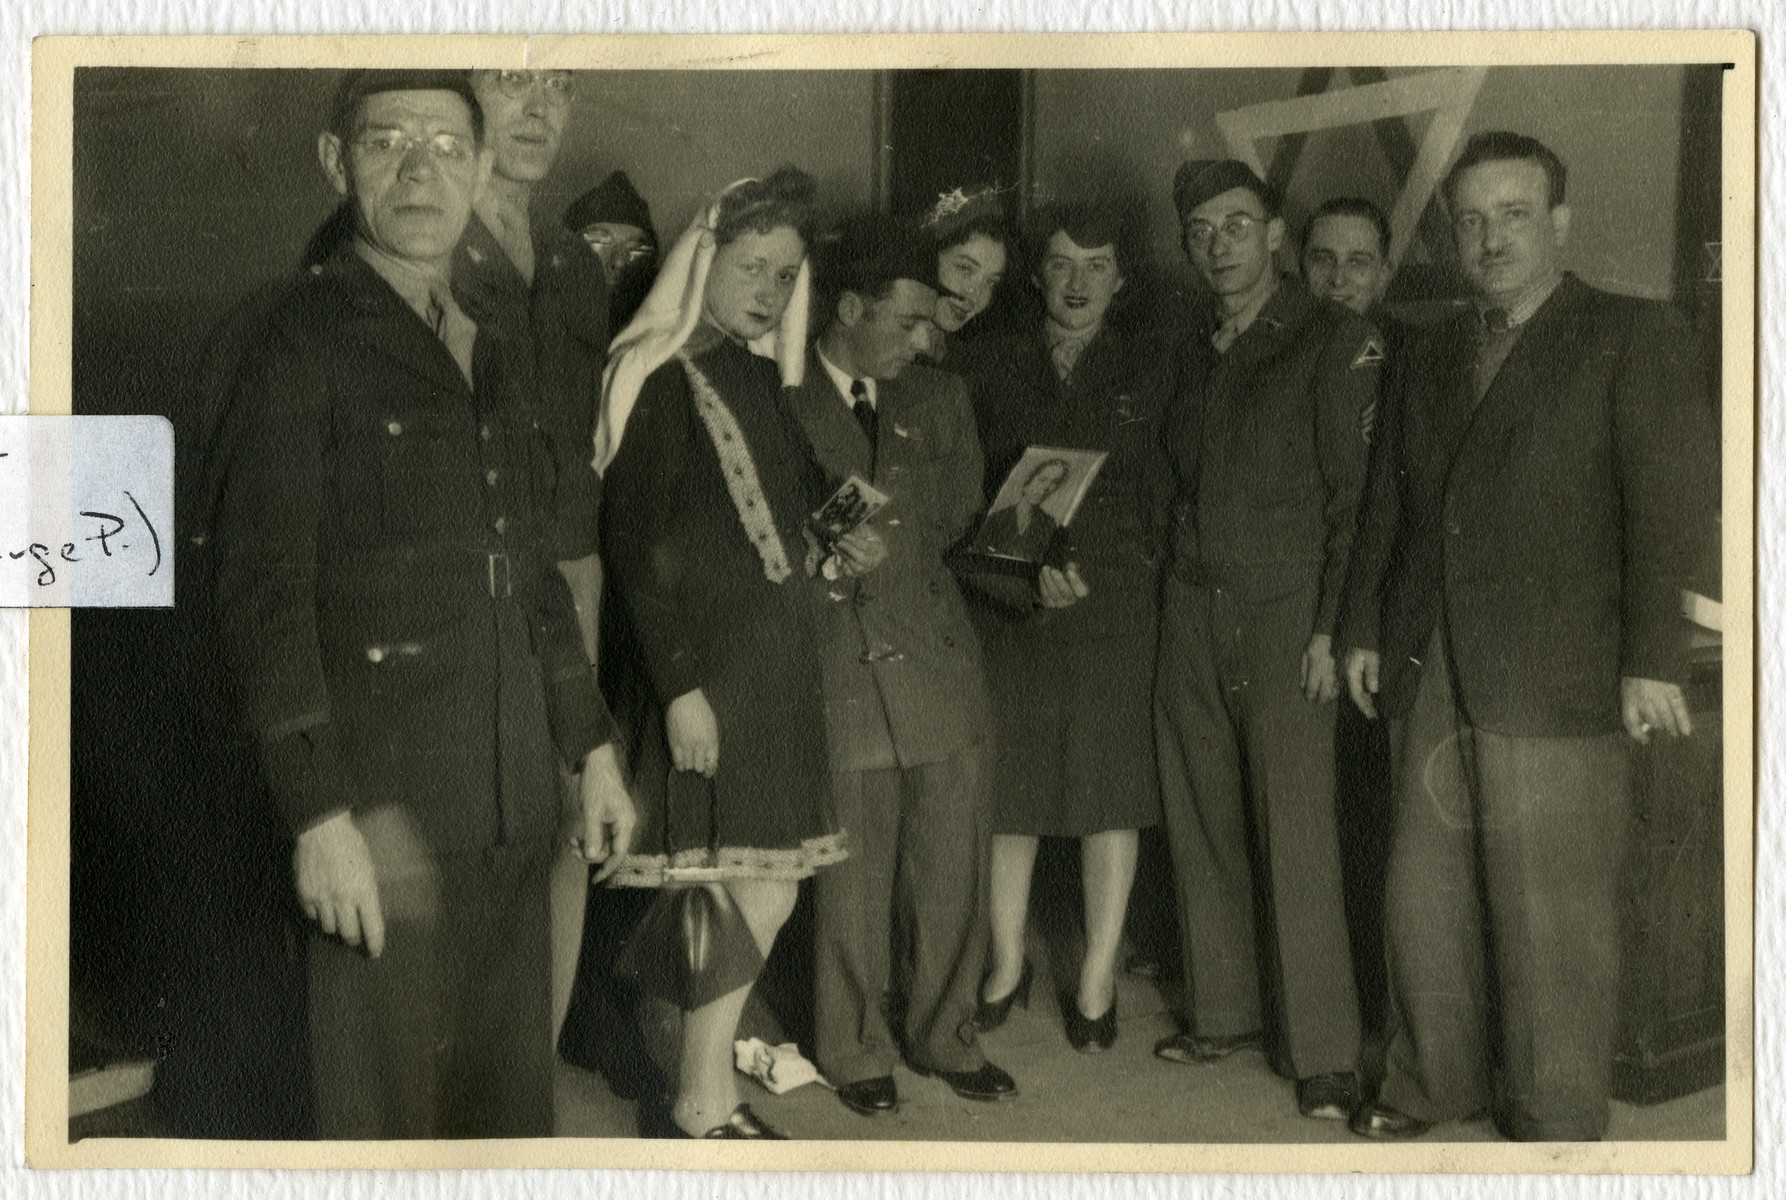 Mr. and Mrs. Pressman hold the photographs of relatives who perished during their wedding in the Stuttgart dsiplaced persons camp.

Cantor Moses Rontal is standing on the far right.